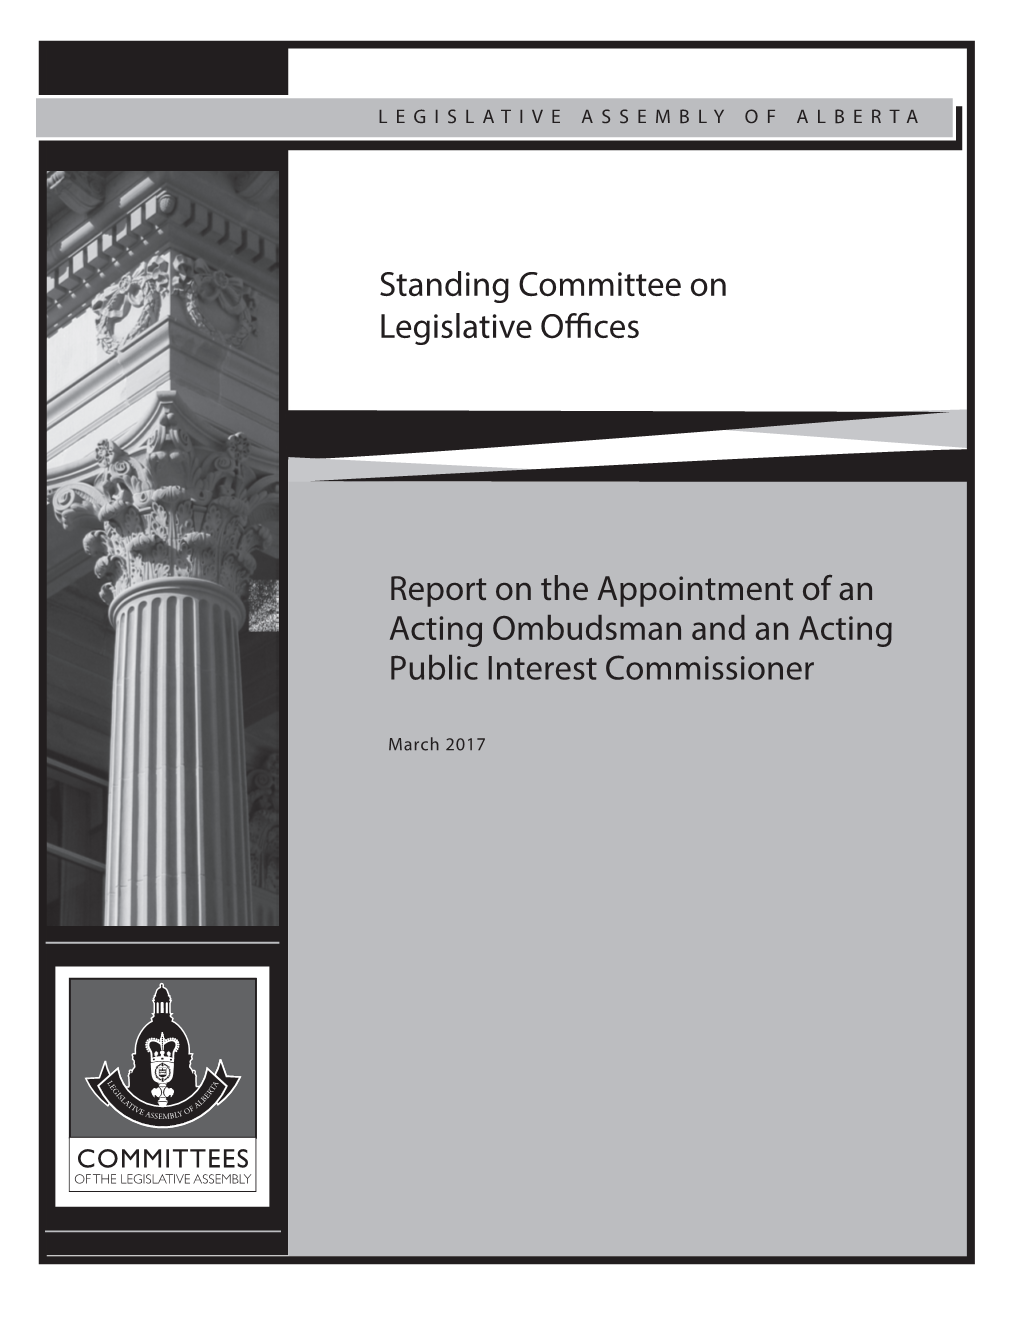 Report on the Appointment of an Acting Ombudsman and an Acting Public Interest Commissioner